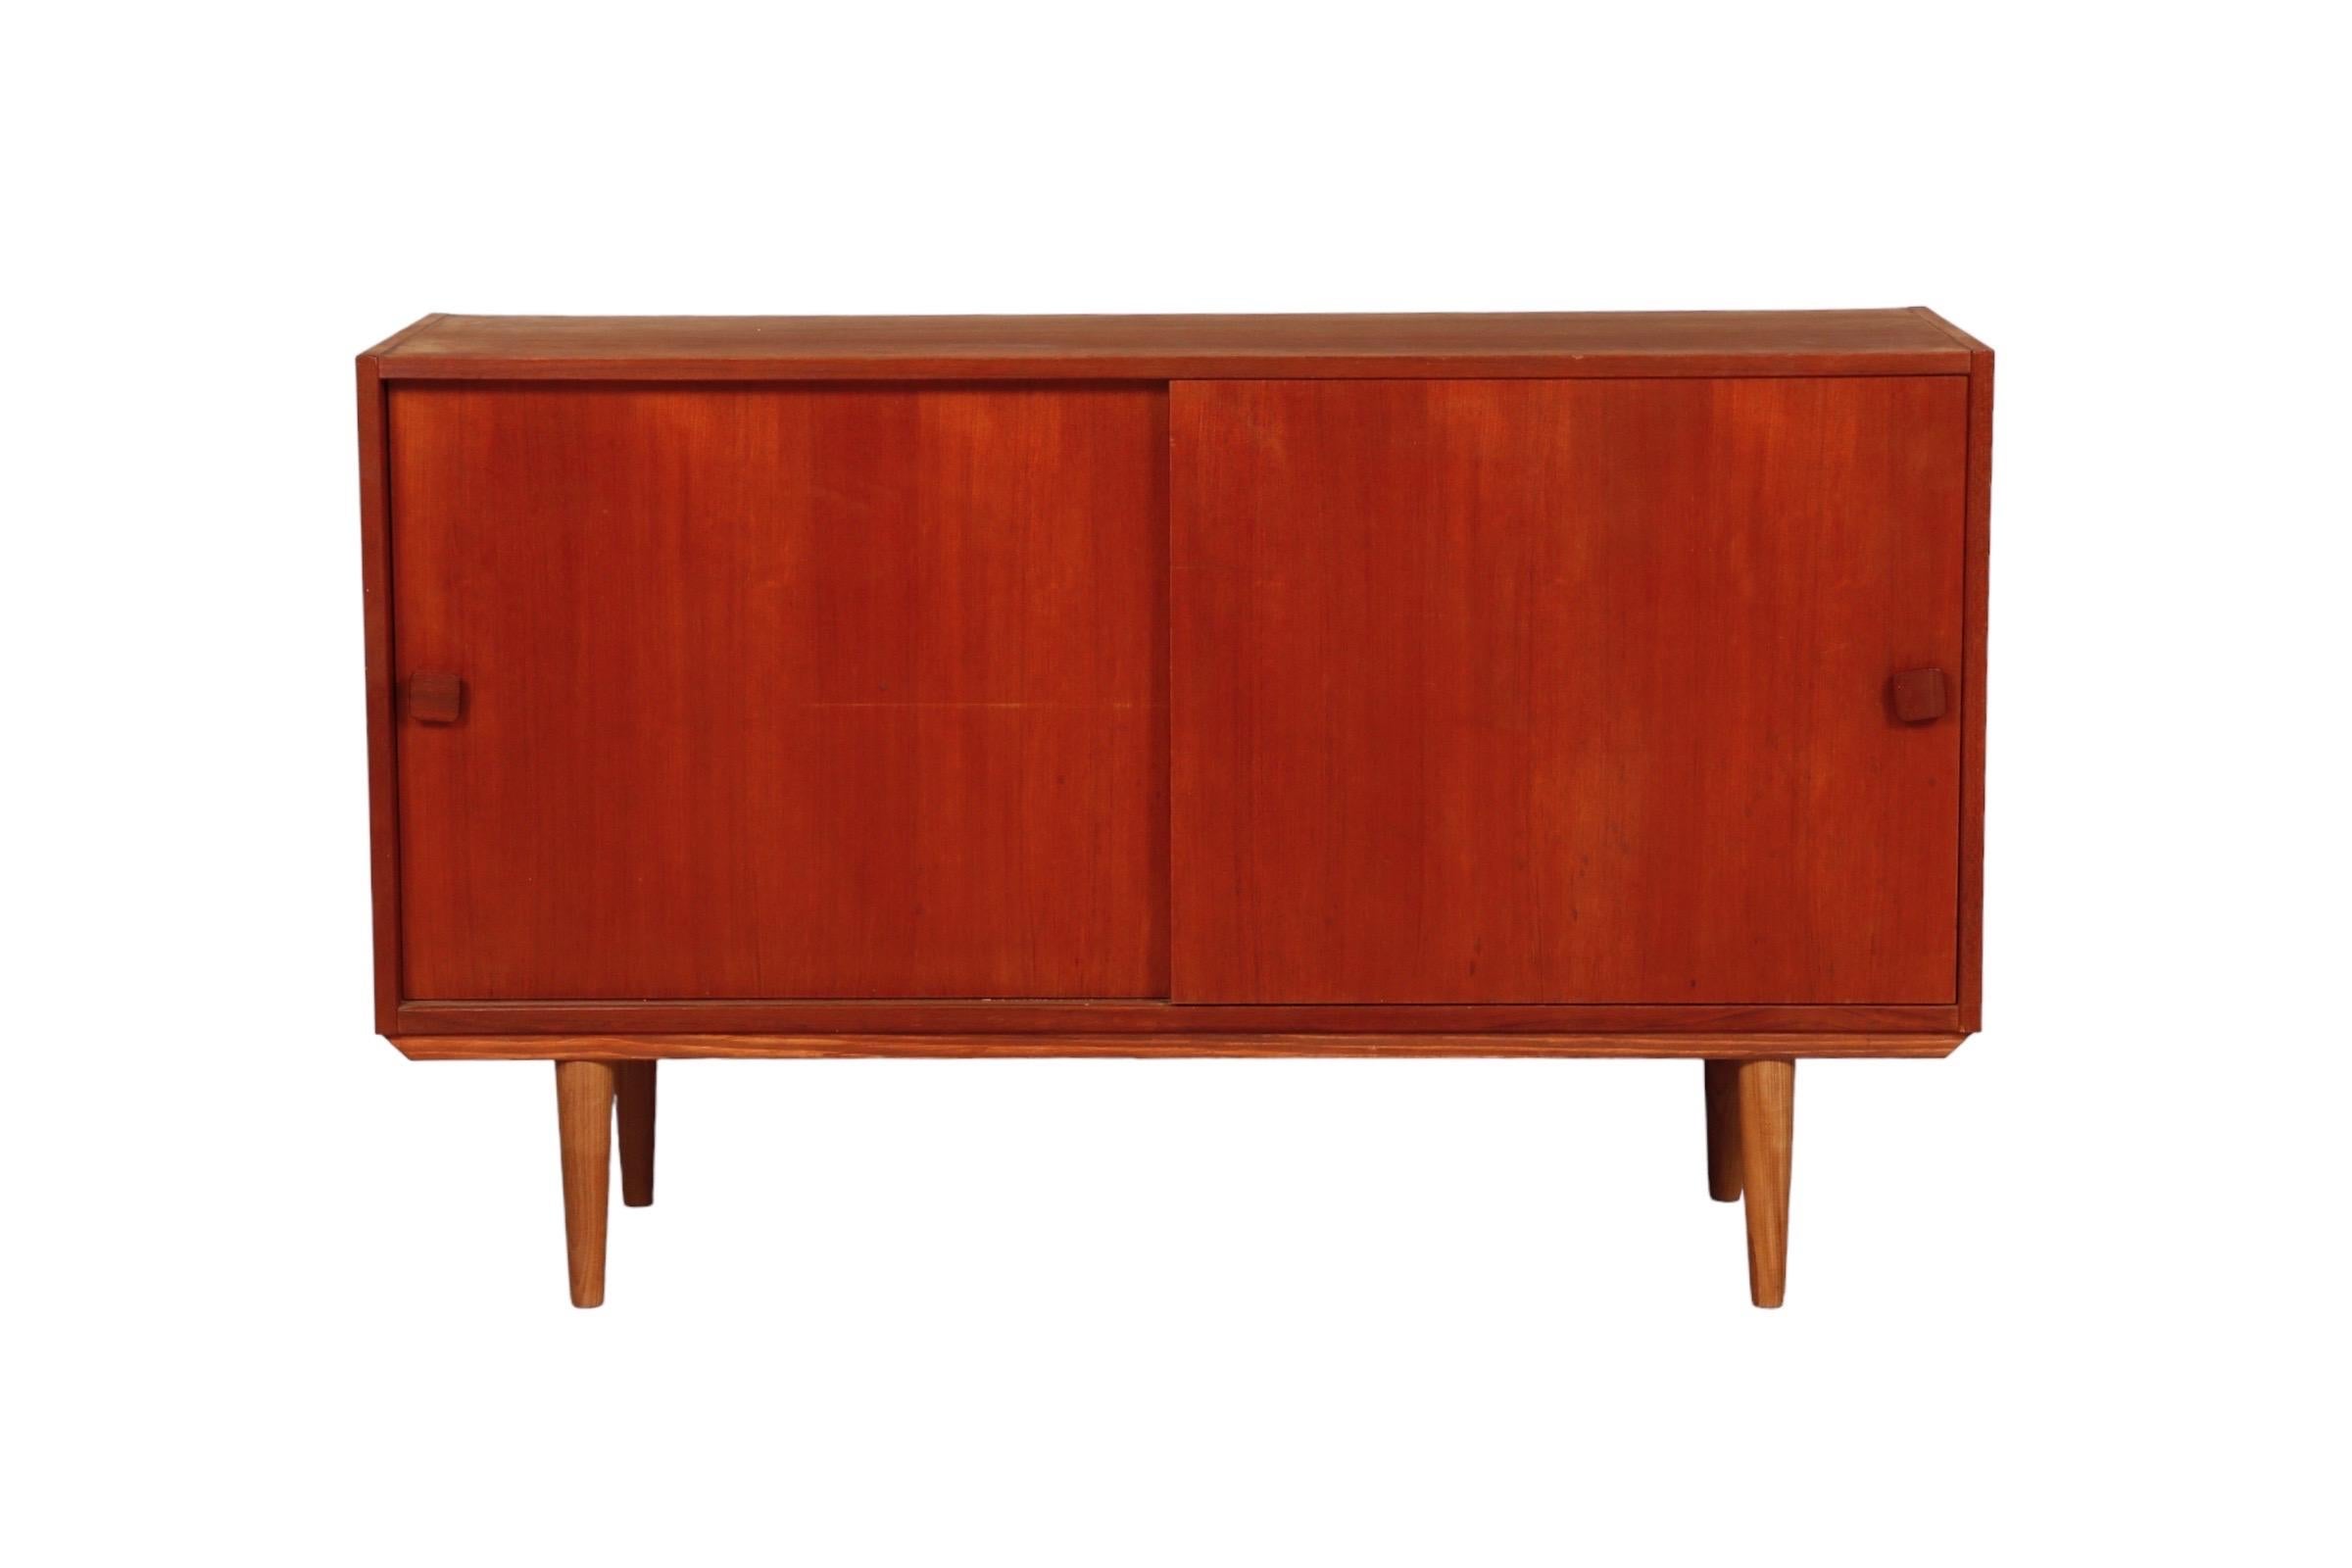 A Danish mid century low sideboard in teak. Two sliding cabinet doors reveal storage with a shelf on each side. Stands on round tapered legs.